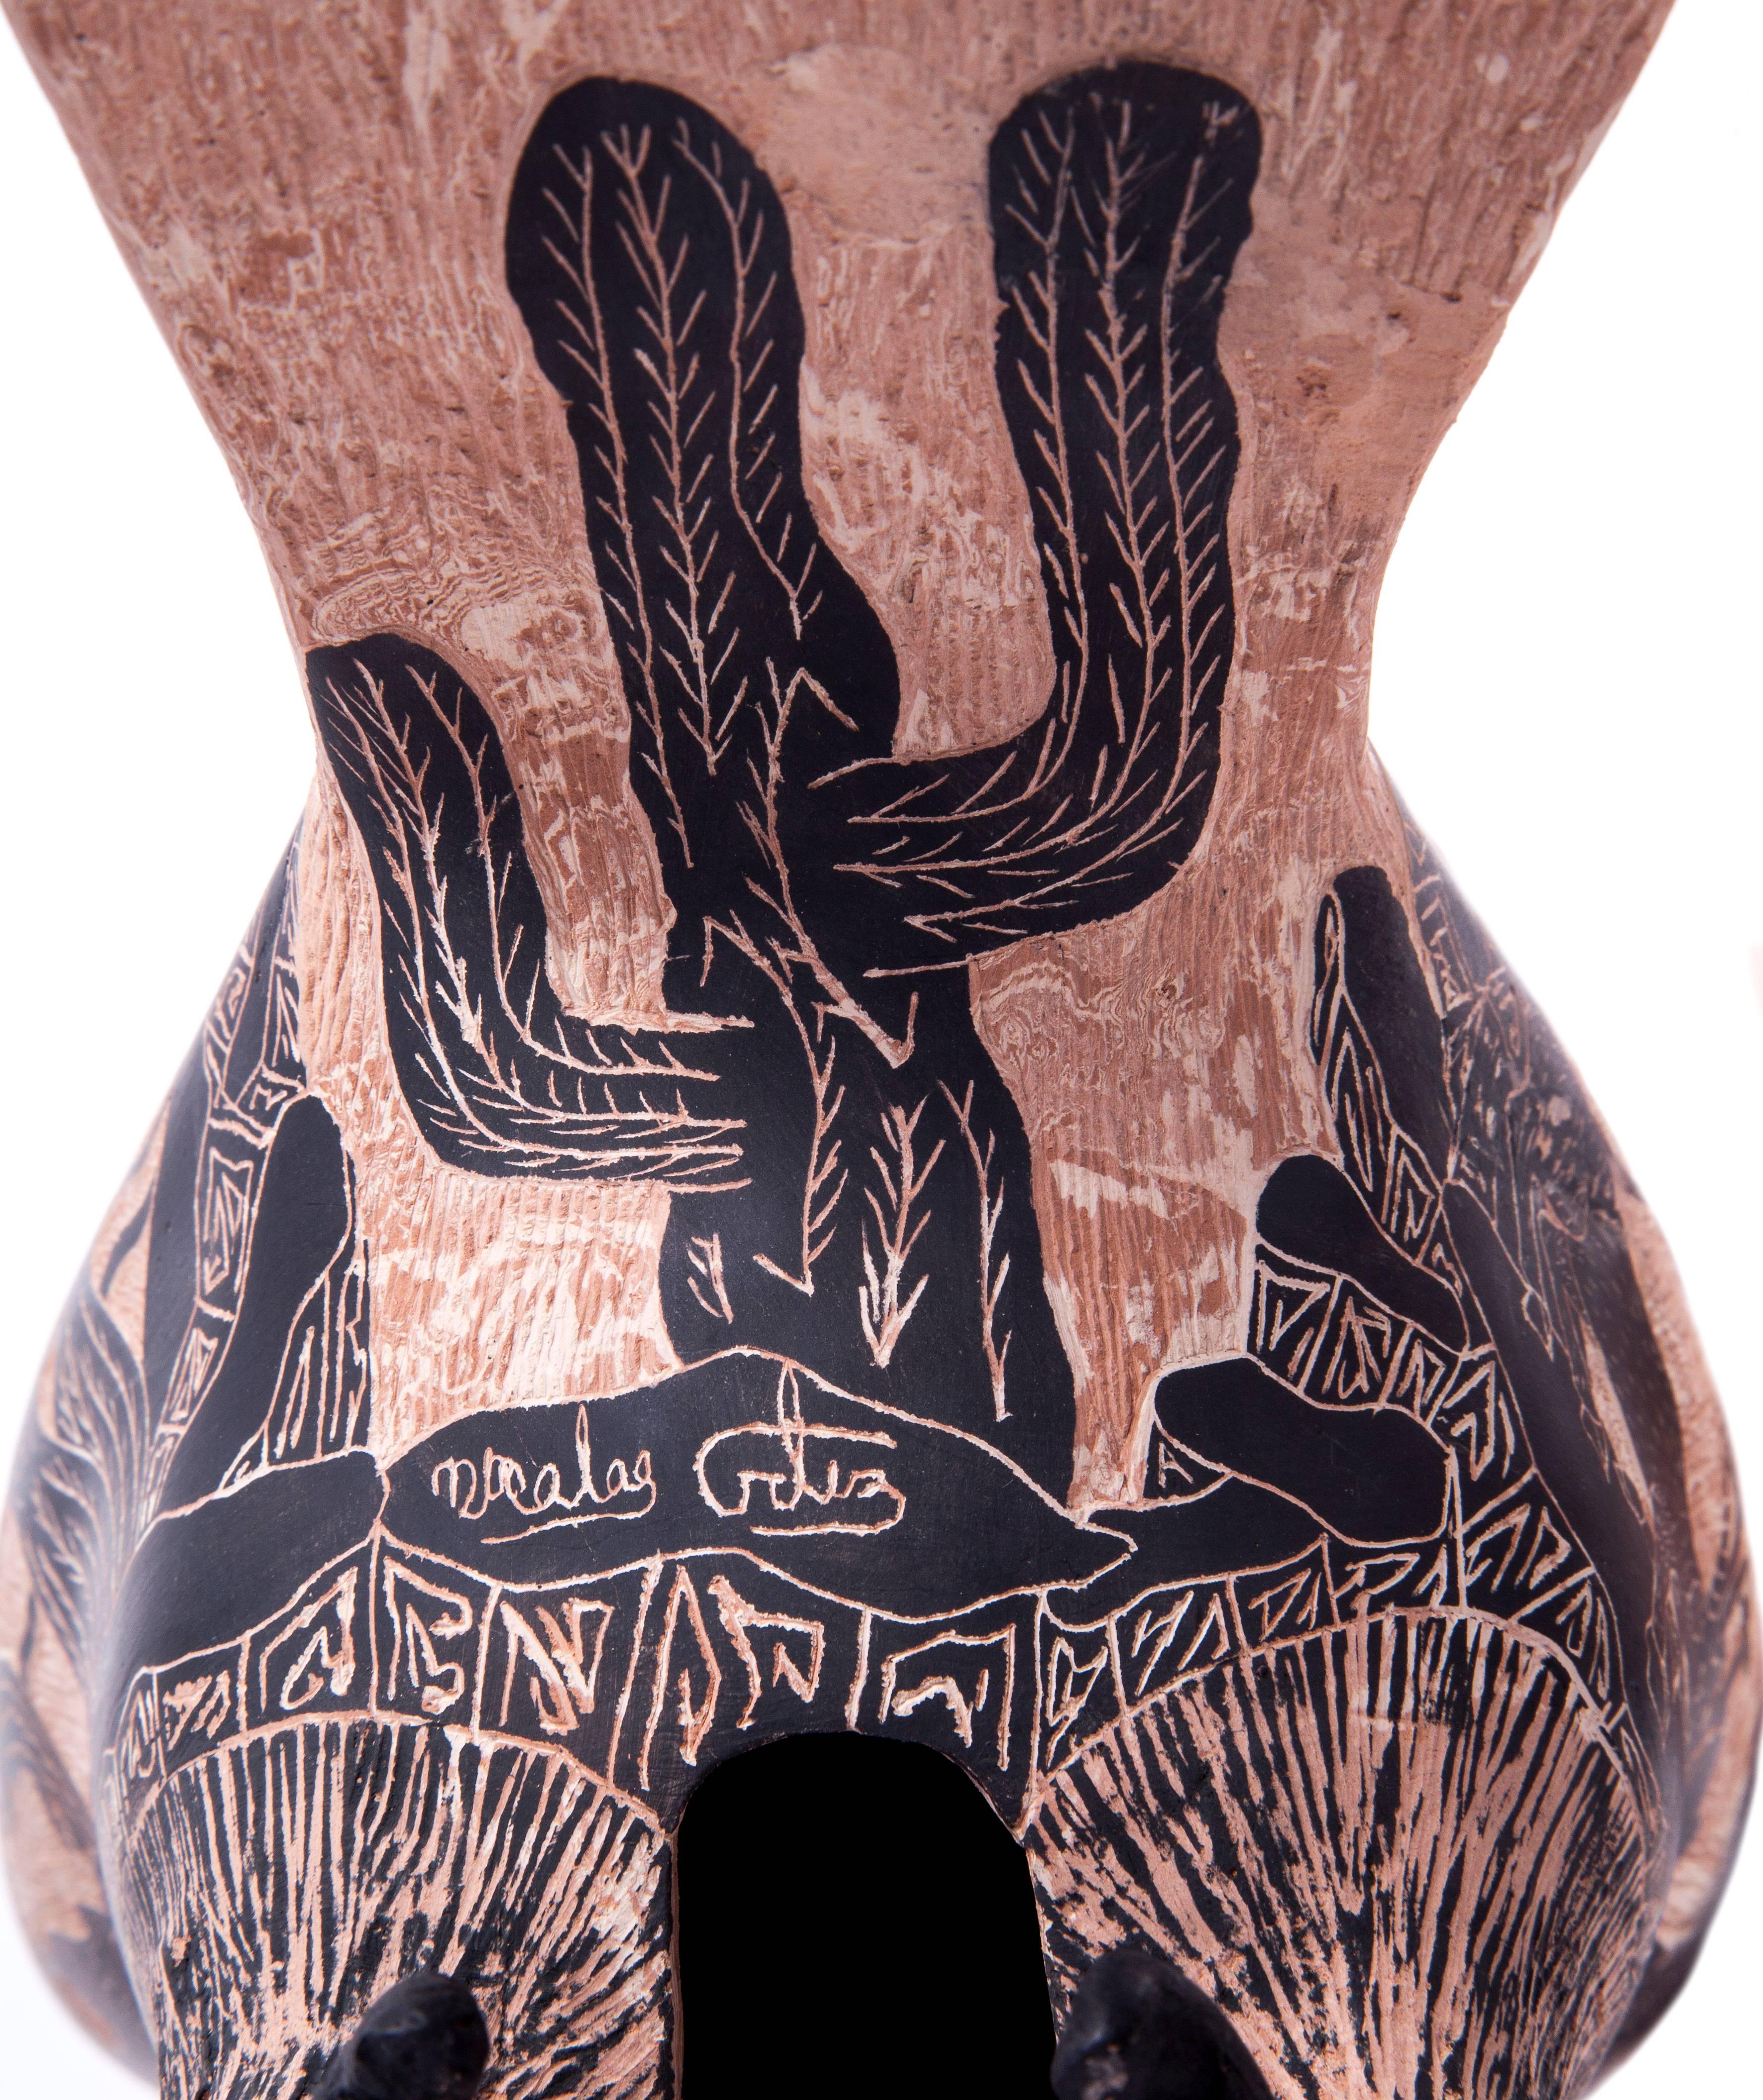 FREE SHIPPING TO WORLDWIDE!

Artisan: Nicolas Ortiz Ortega
MASTERPIECE
Carved polychrome shape decorated with a sgraffito technique. 

- Dimensions: 12